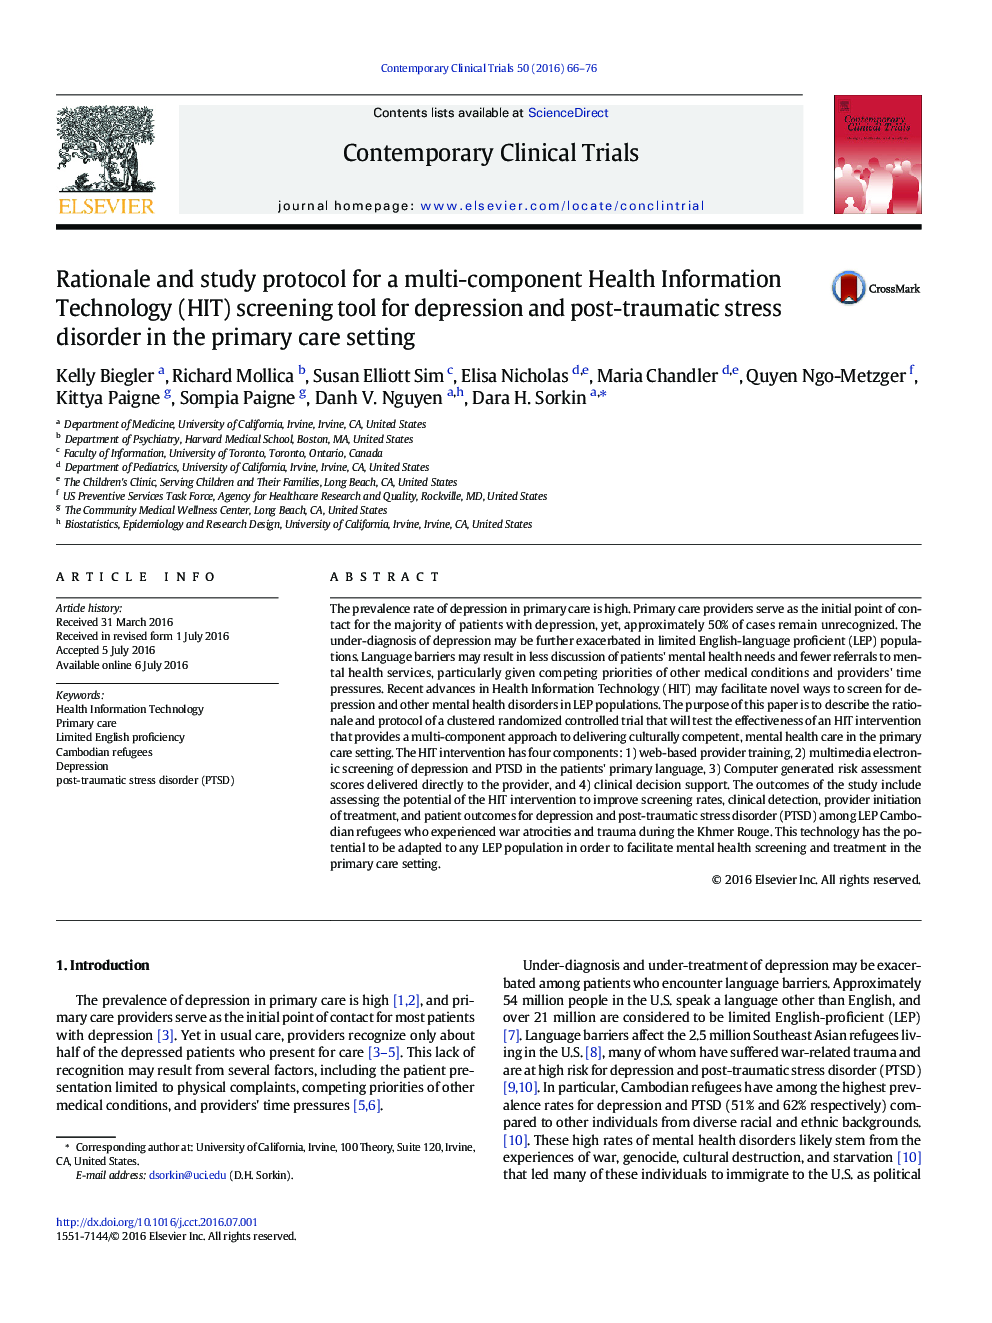 Rationale and study protocol for a multi-component Health Information Technology (HIT) screening tool for depression and post-traumatic stress disorder in the primary care setting